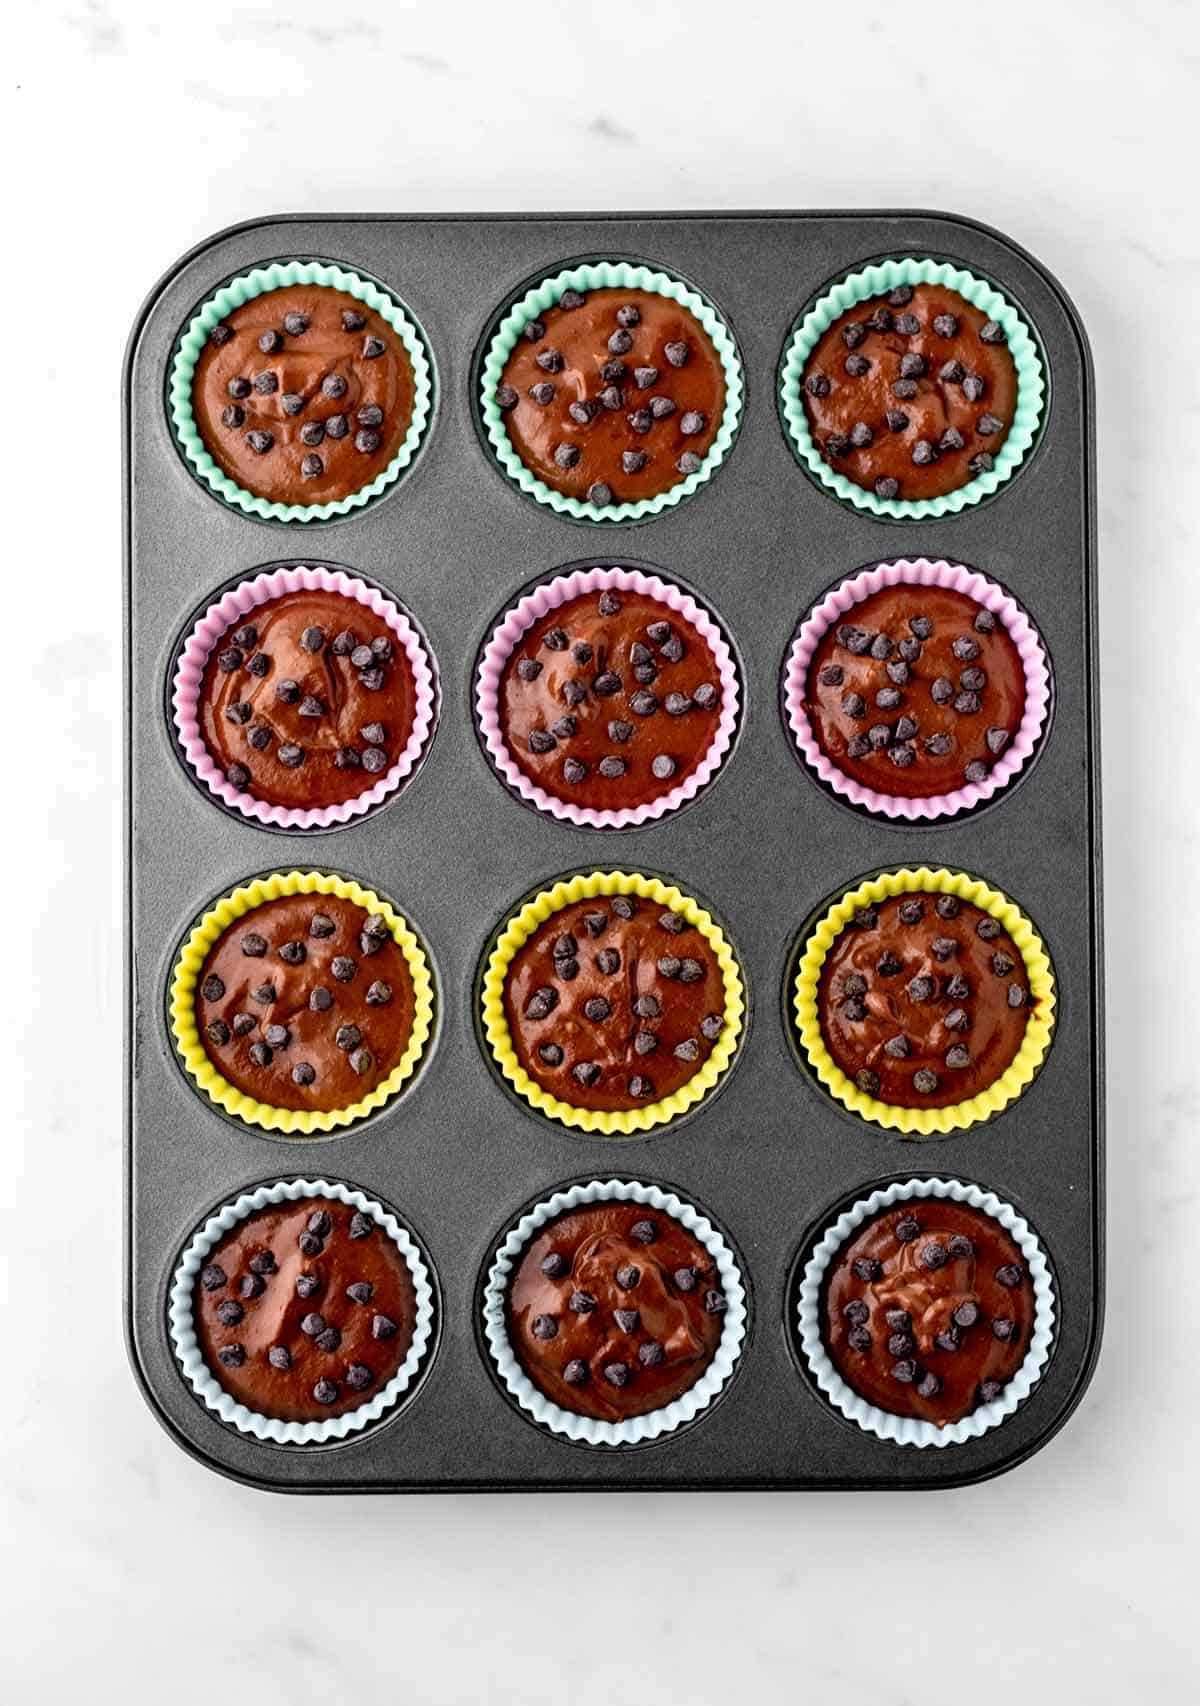 The 3-ingredient brownie batter divided into silicone muffin cups in a muffin tin.